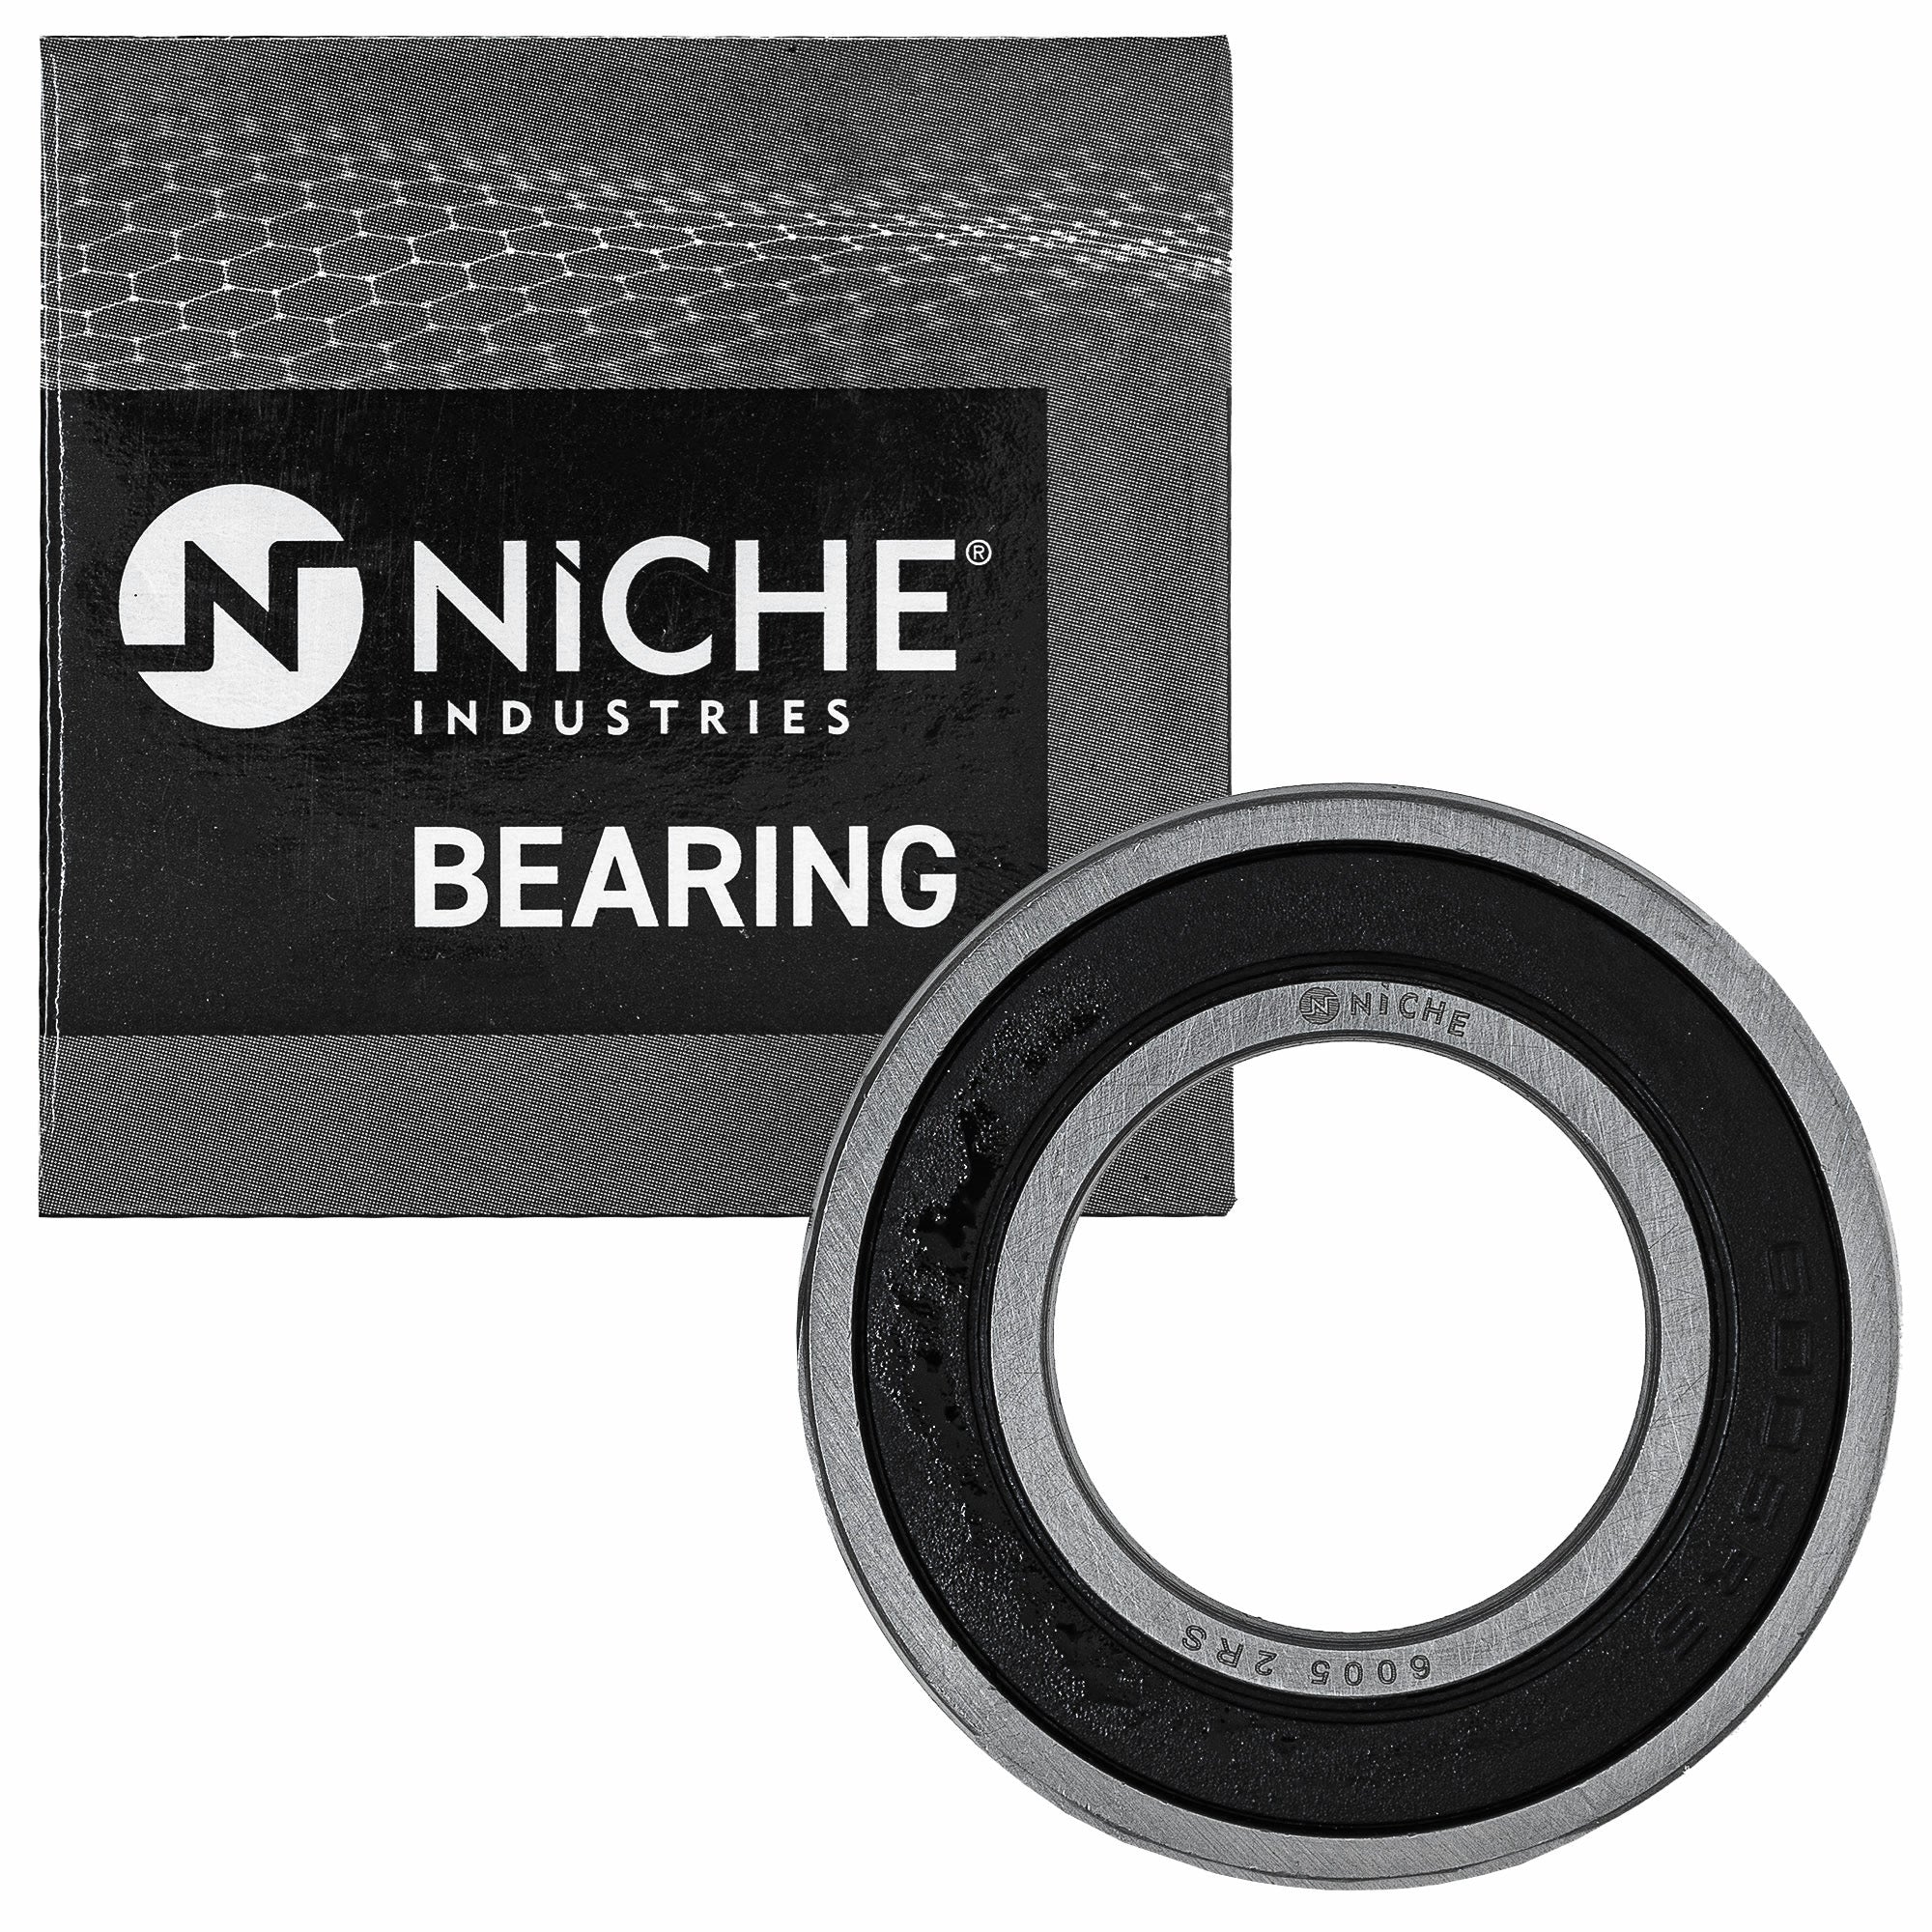 NICHE MK1009193 Wheel Bearing Seal Kit for zOTHER Shiver S1000XR